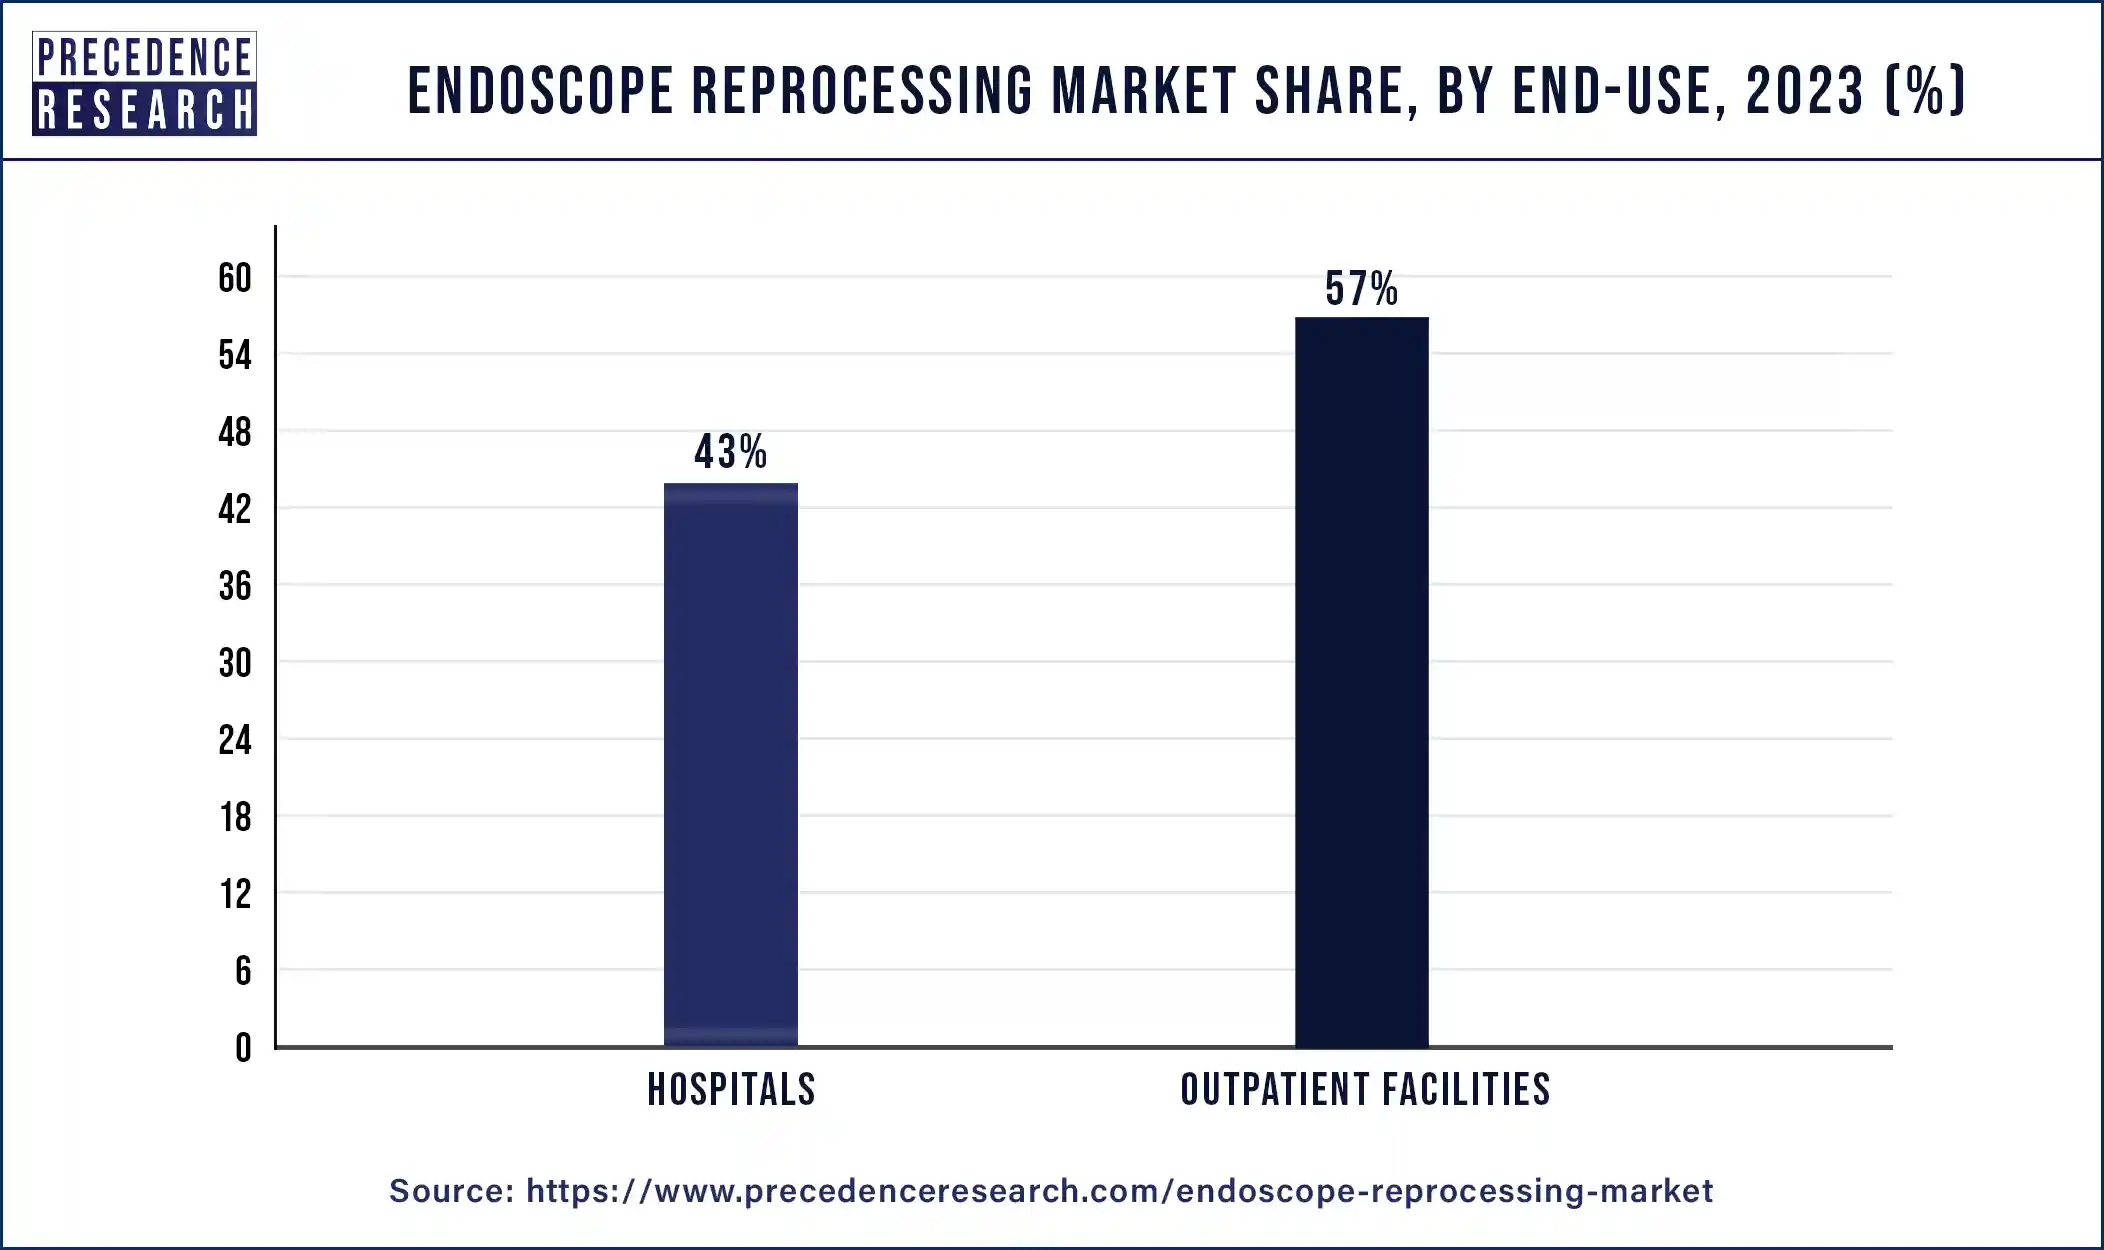 Endoscope Reprocessing Market Share, By End-use, 2023 (%)